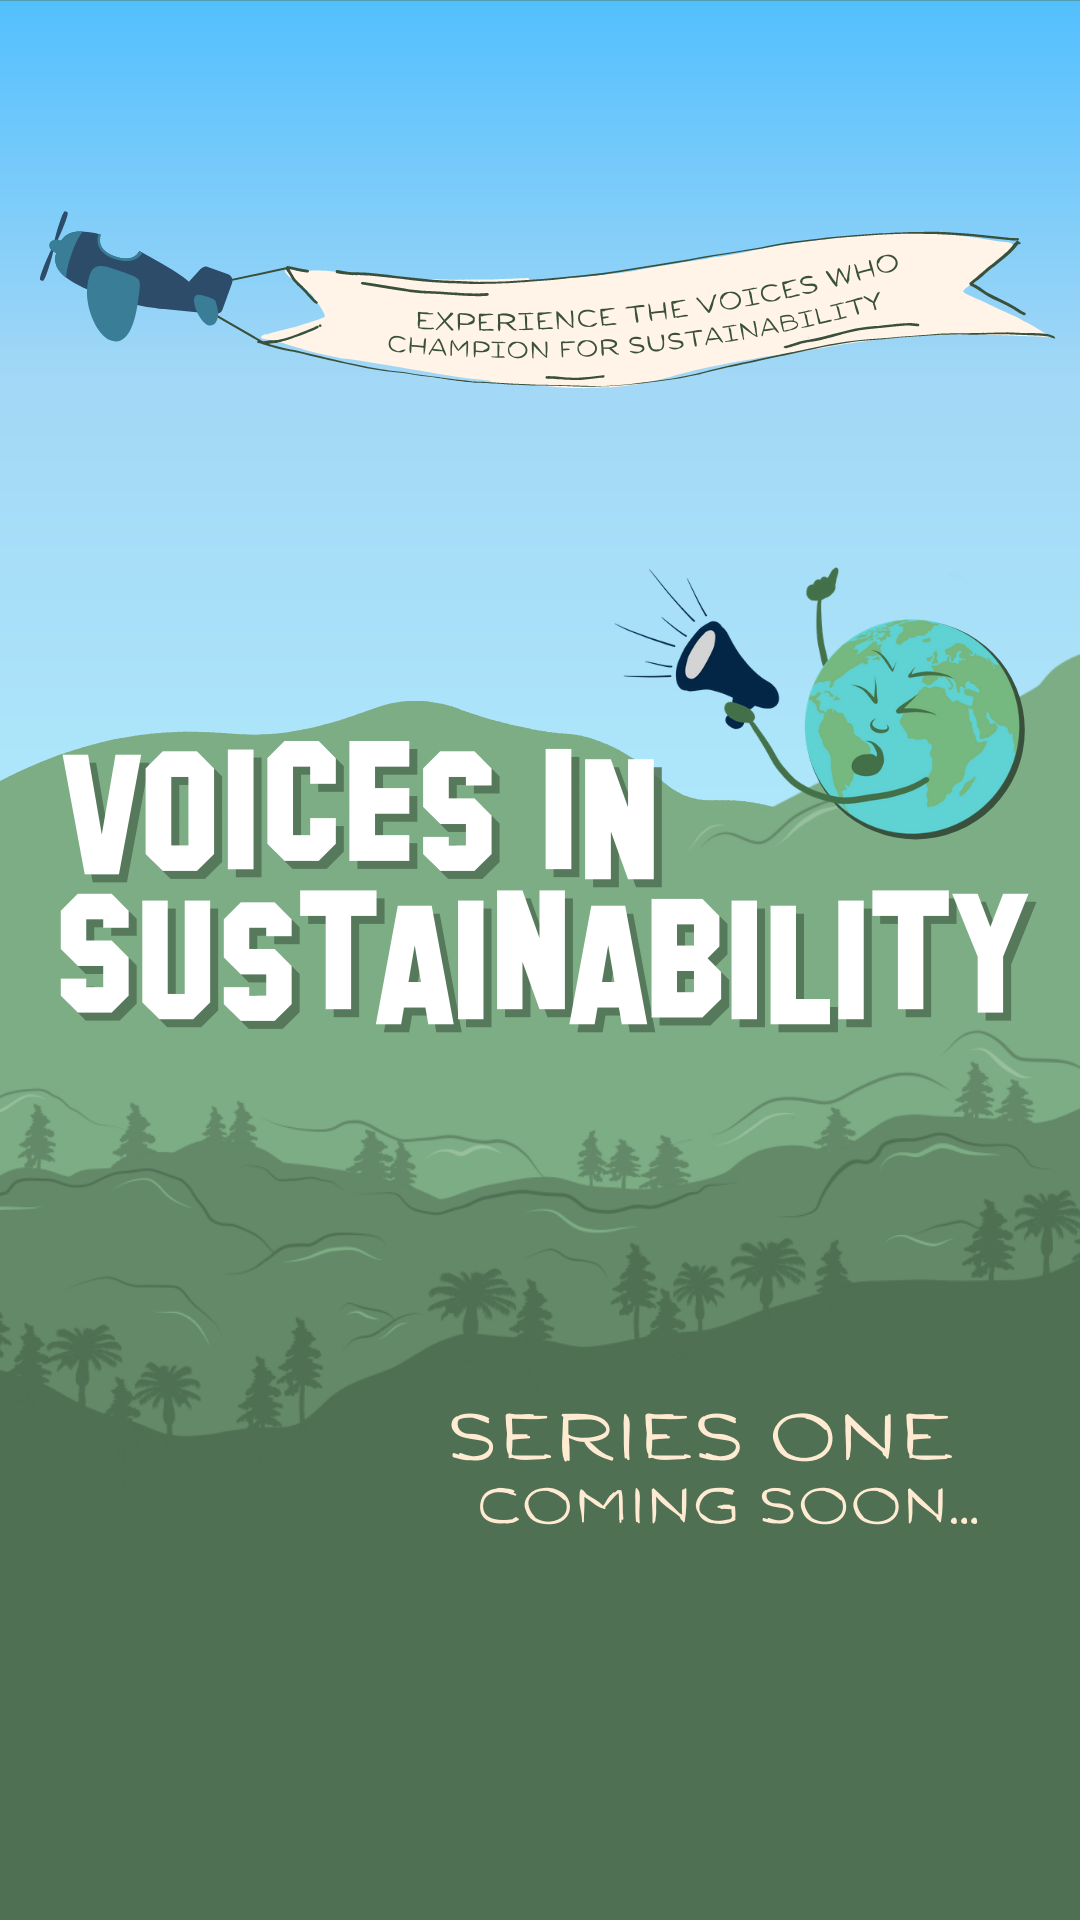 Experience the voices who champion for sustainability Voice in sustainability series one coming soon